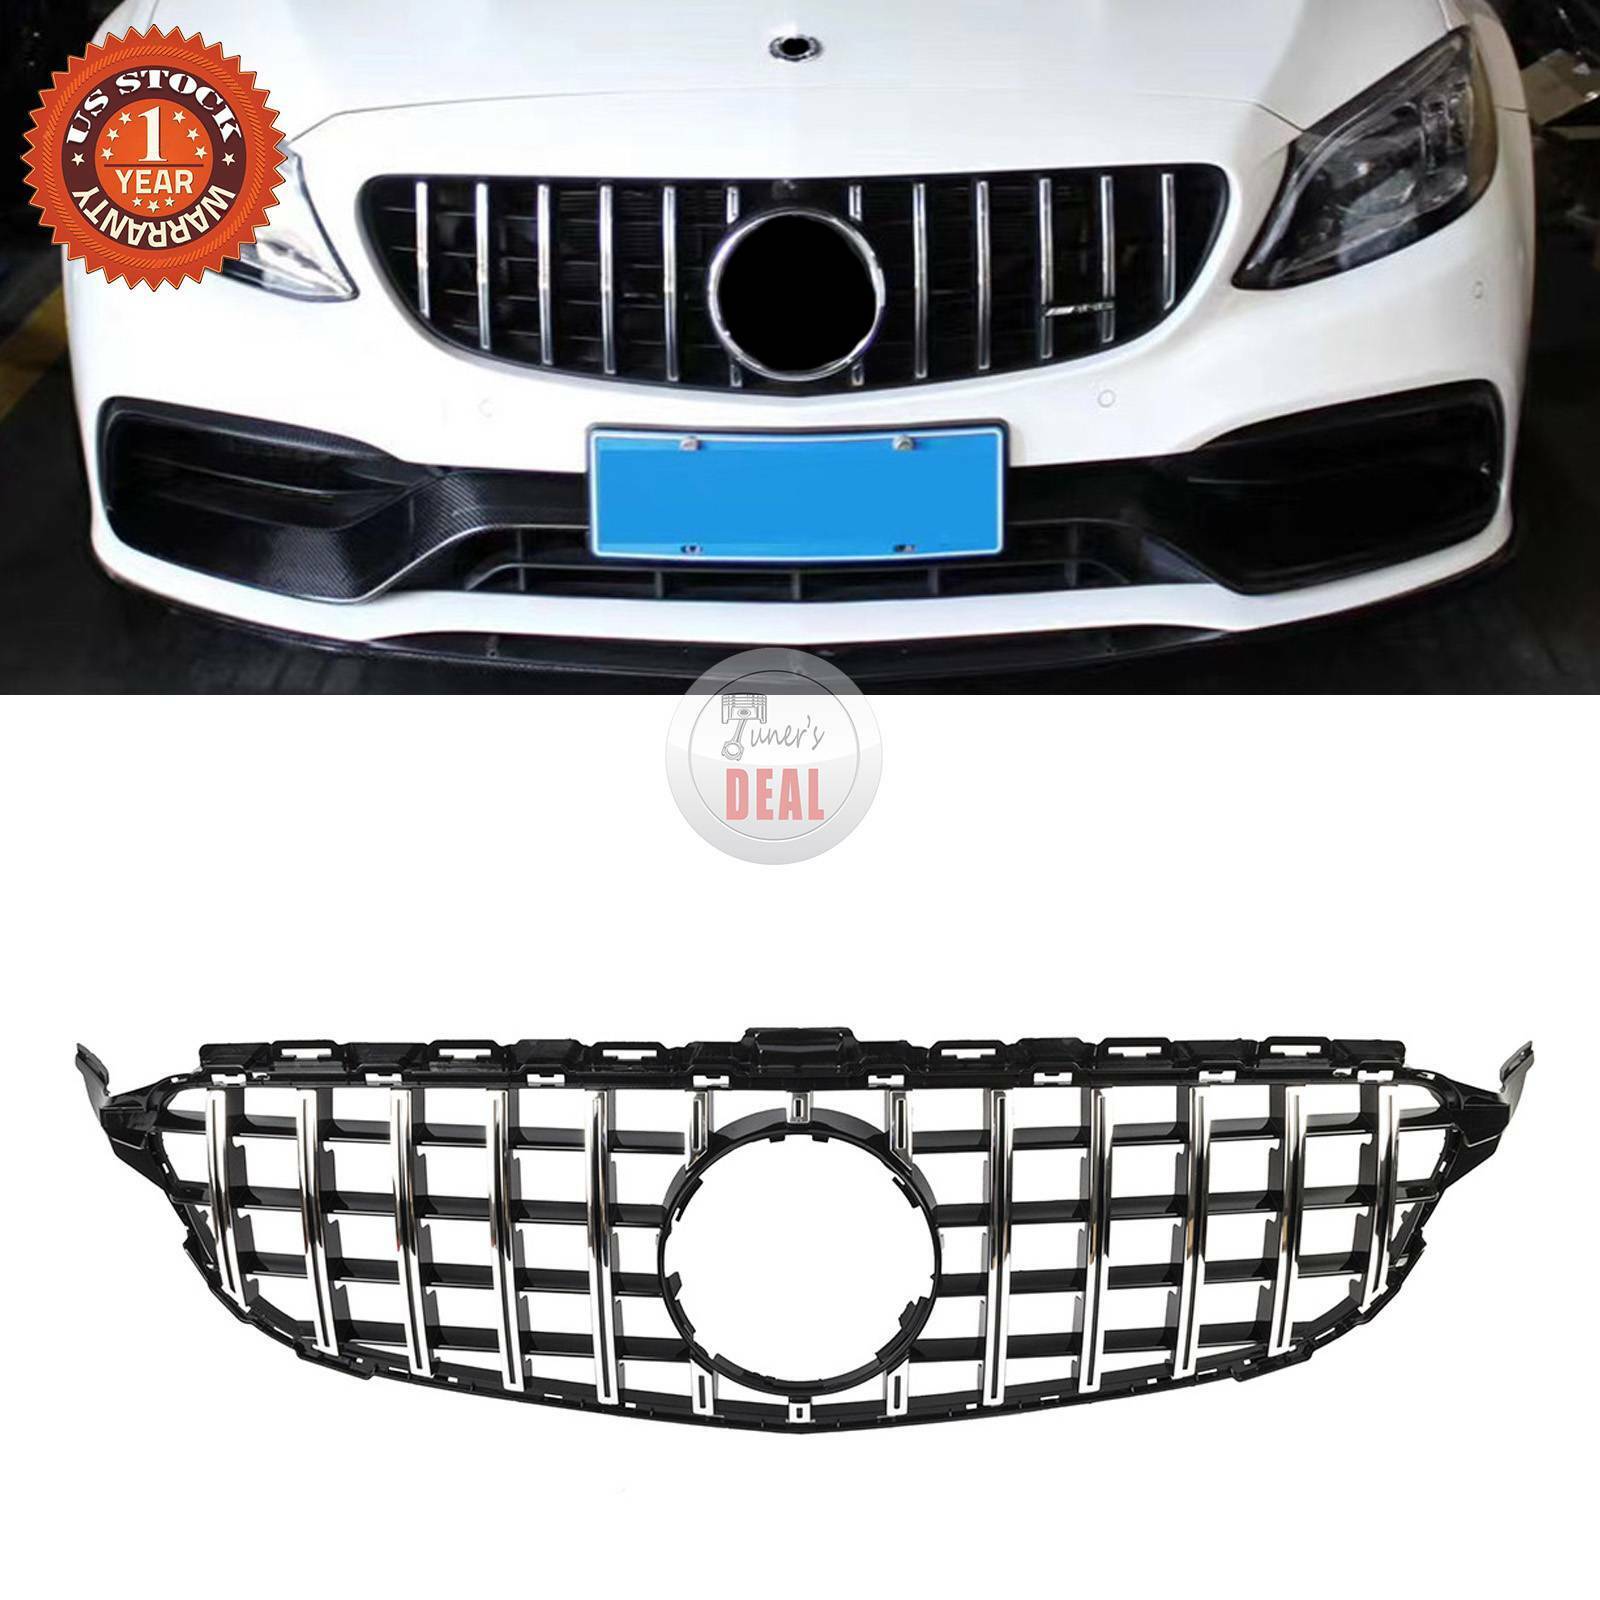 Silver GTR AMG Grille Front Bumper For 2015-2018 Mercedes W205 C180 C200 C300